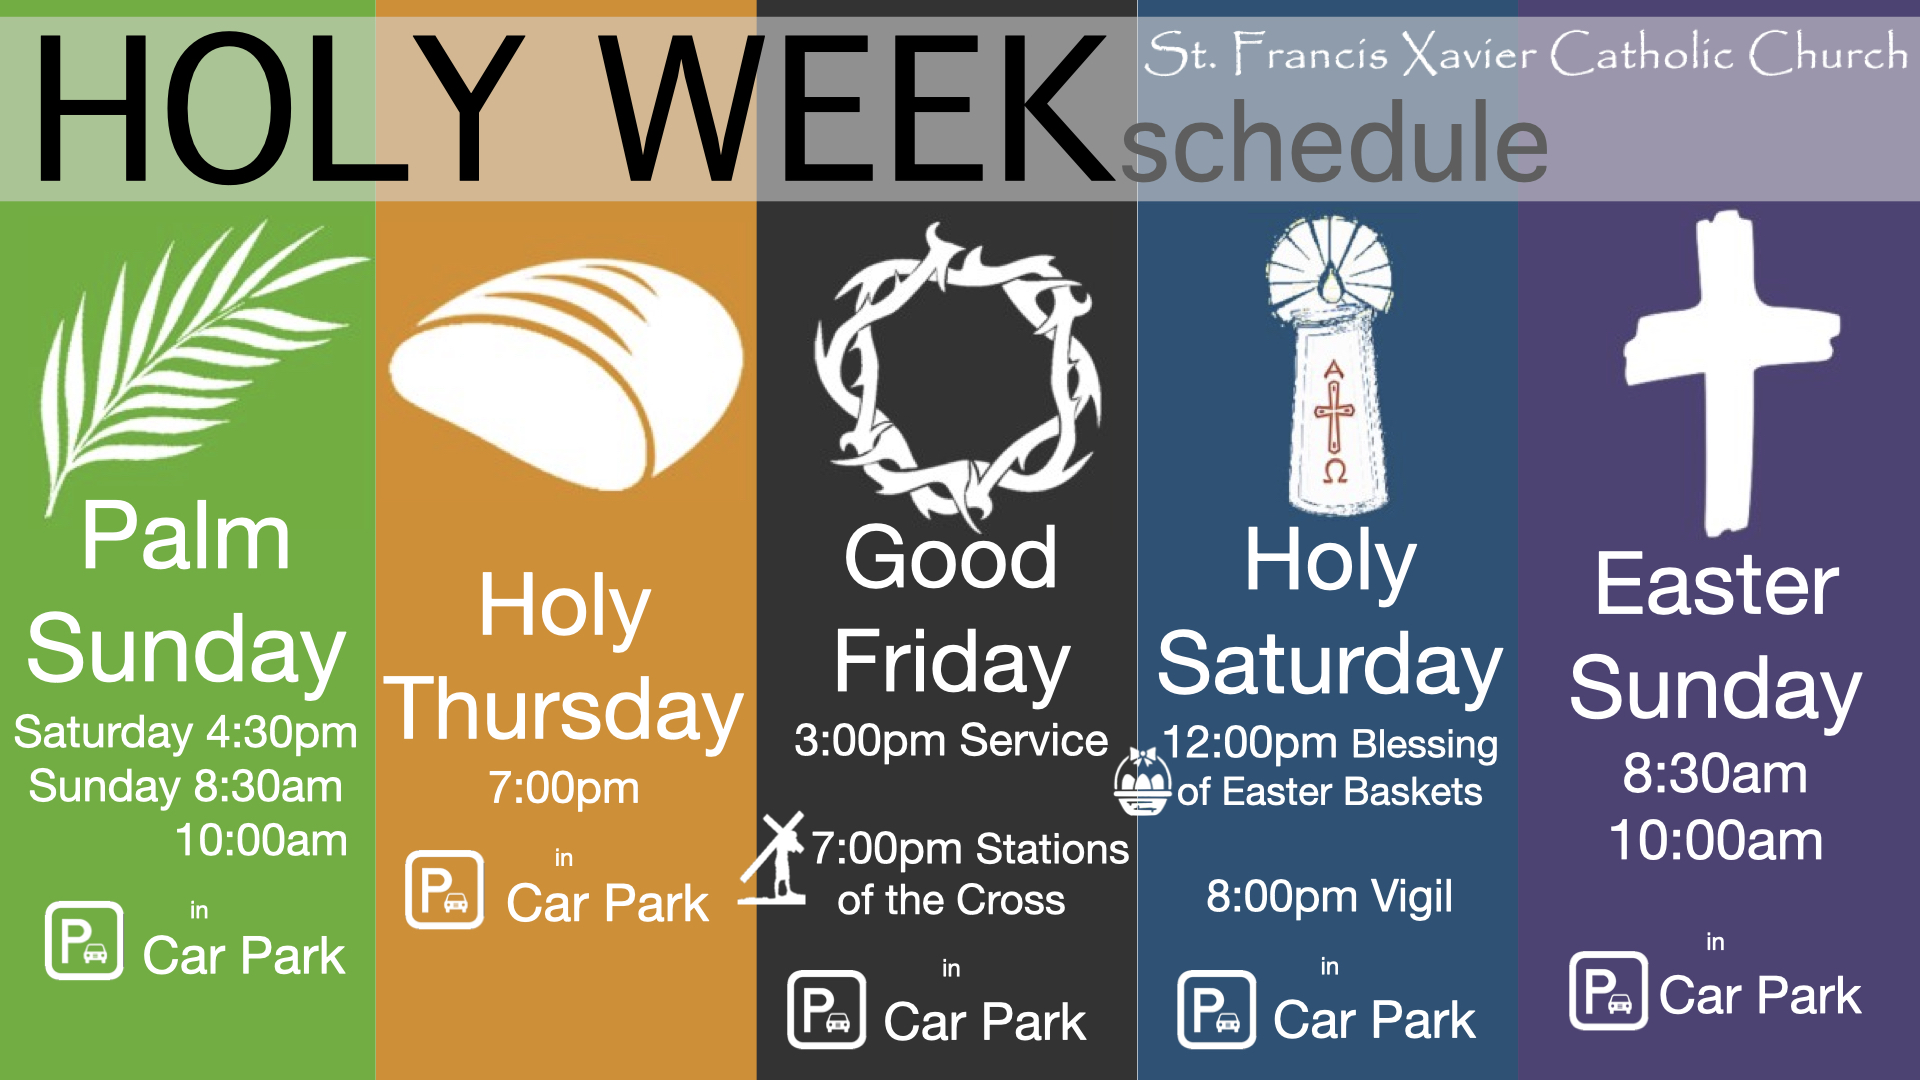 holy week images